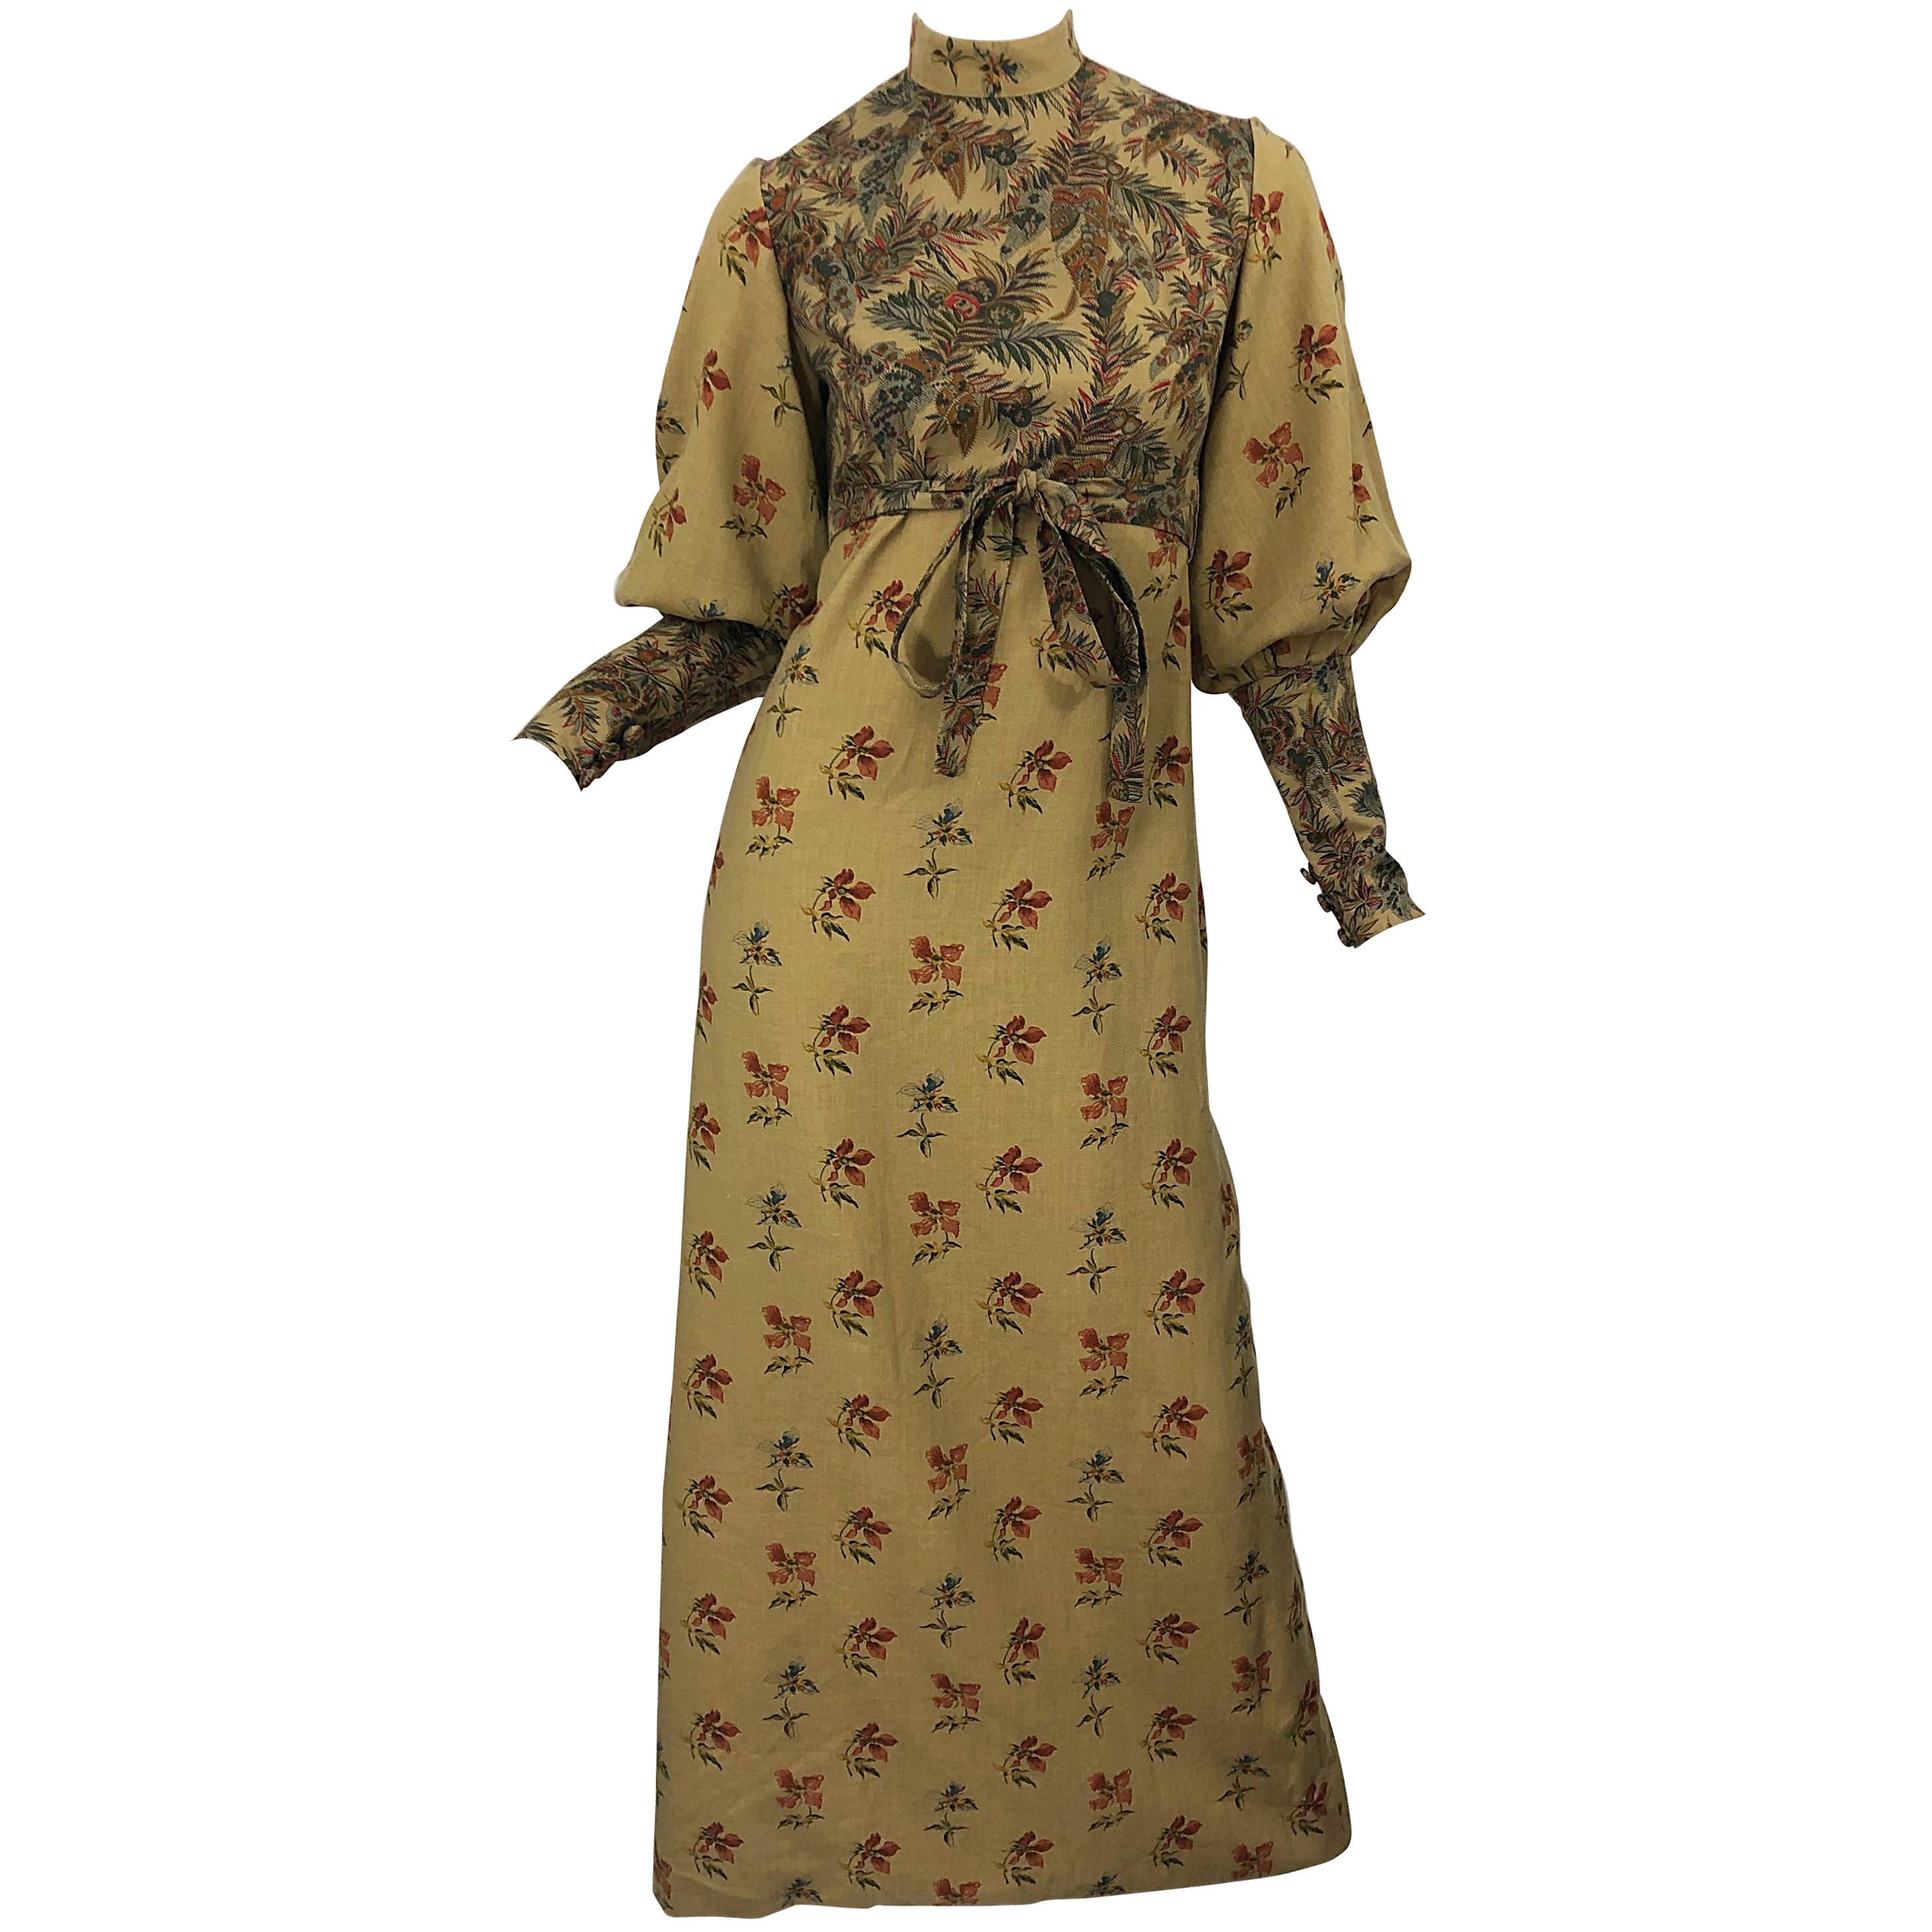 Beautiful 1970s Victorian inspired Autumnal lightweight wool challis long sleeve maxi dress ! Features warm tone of khaki, brown, red, burgundy, green and orange. Printed flowers and leaves throughout. High neck with bishop sleeves. Hidden zipper up